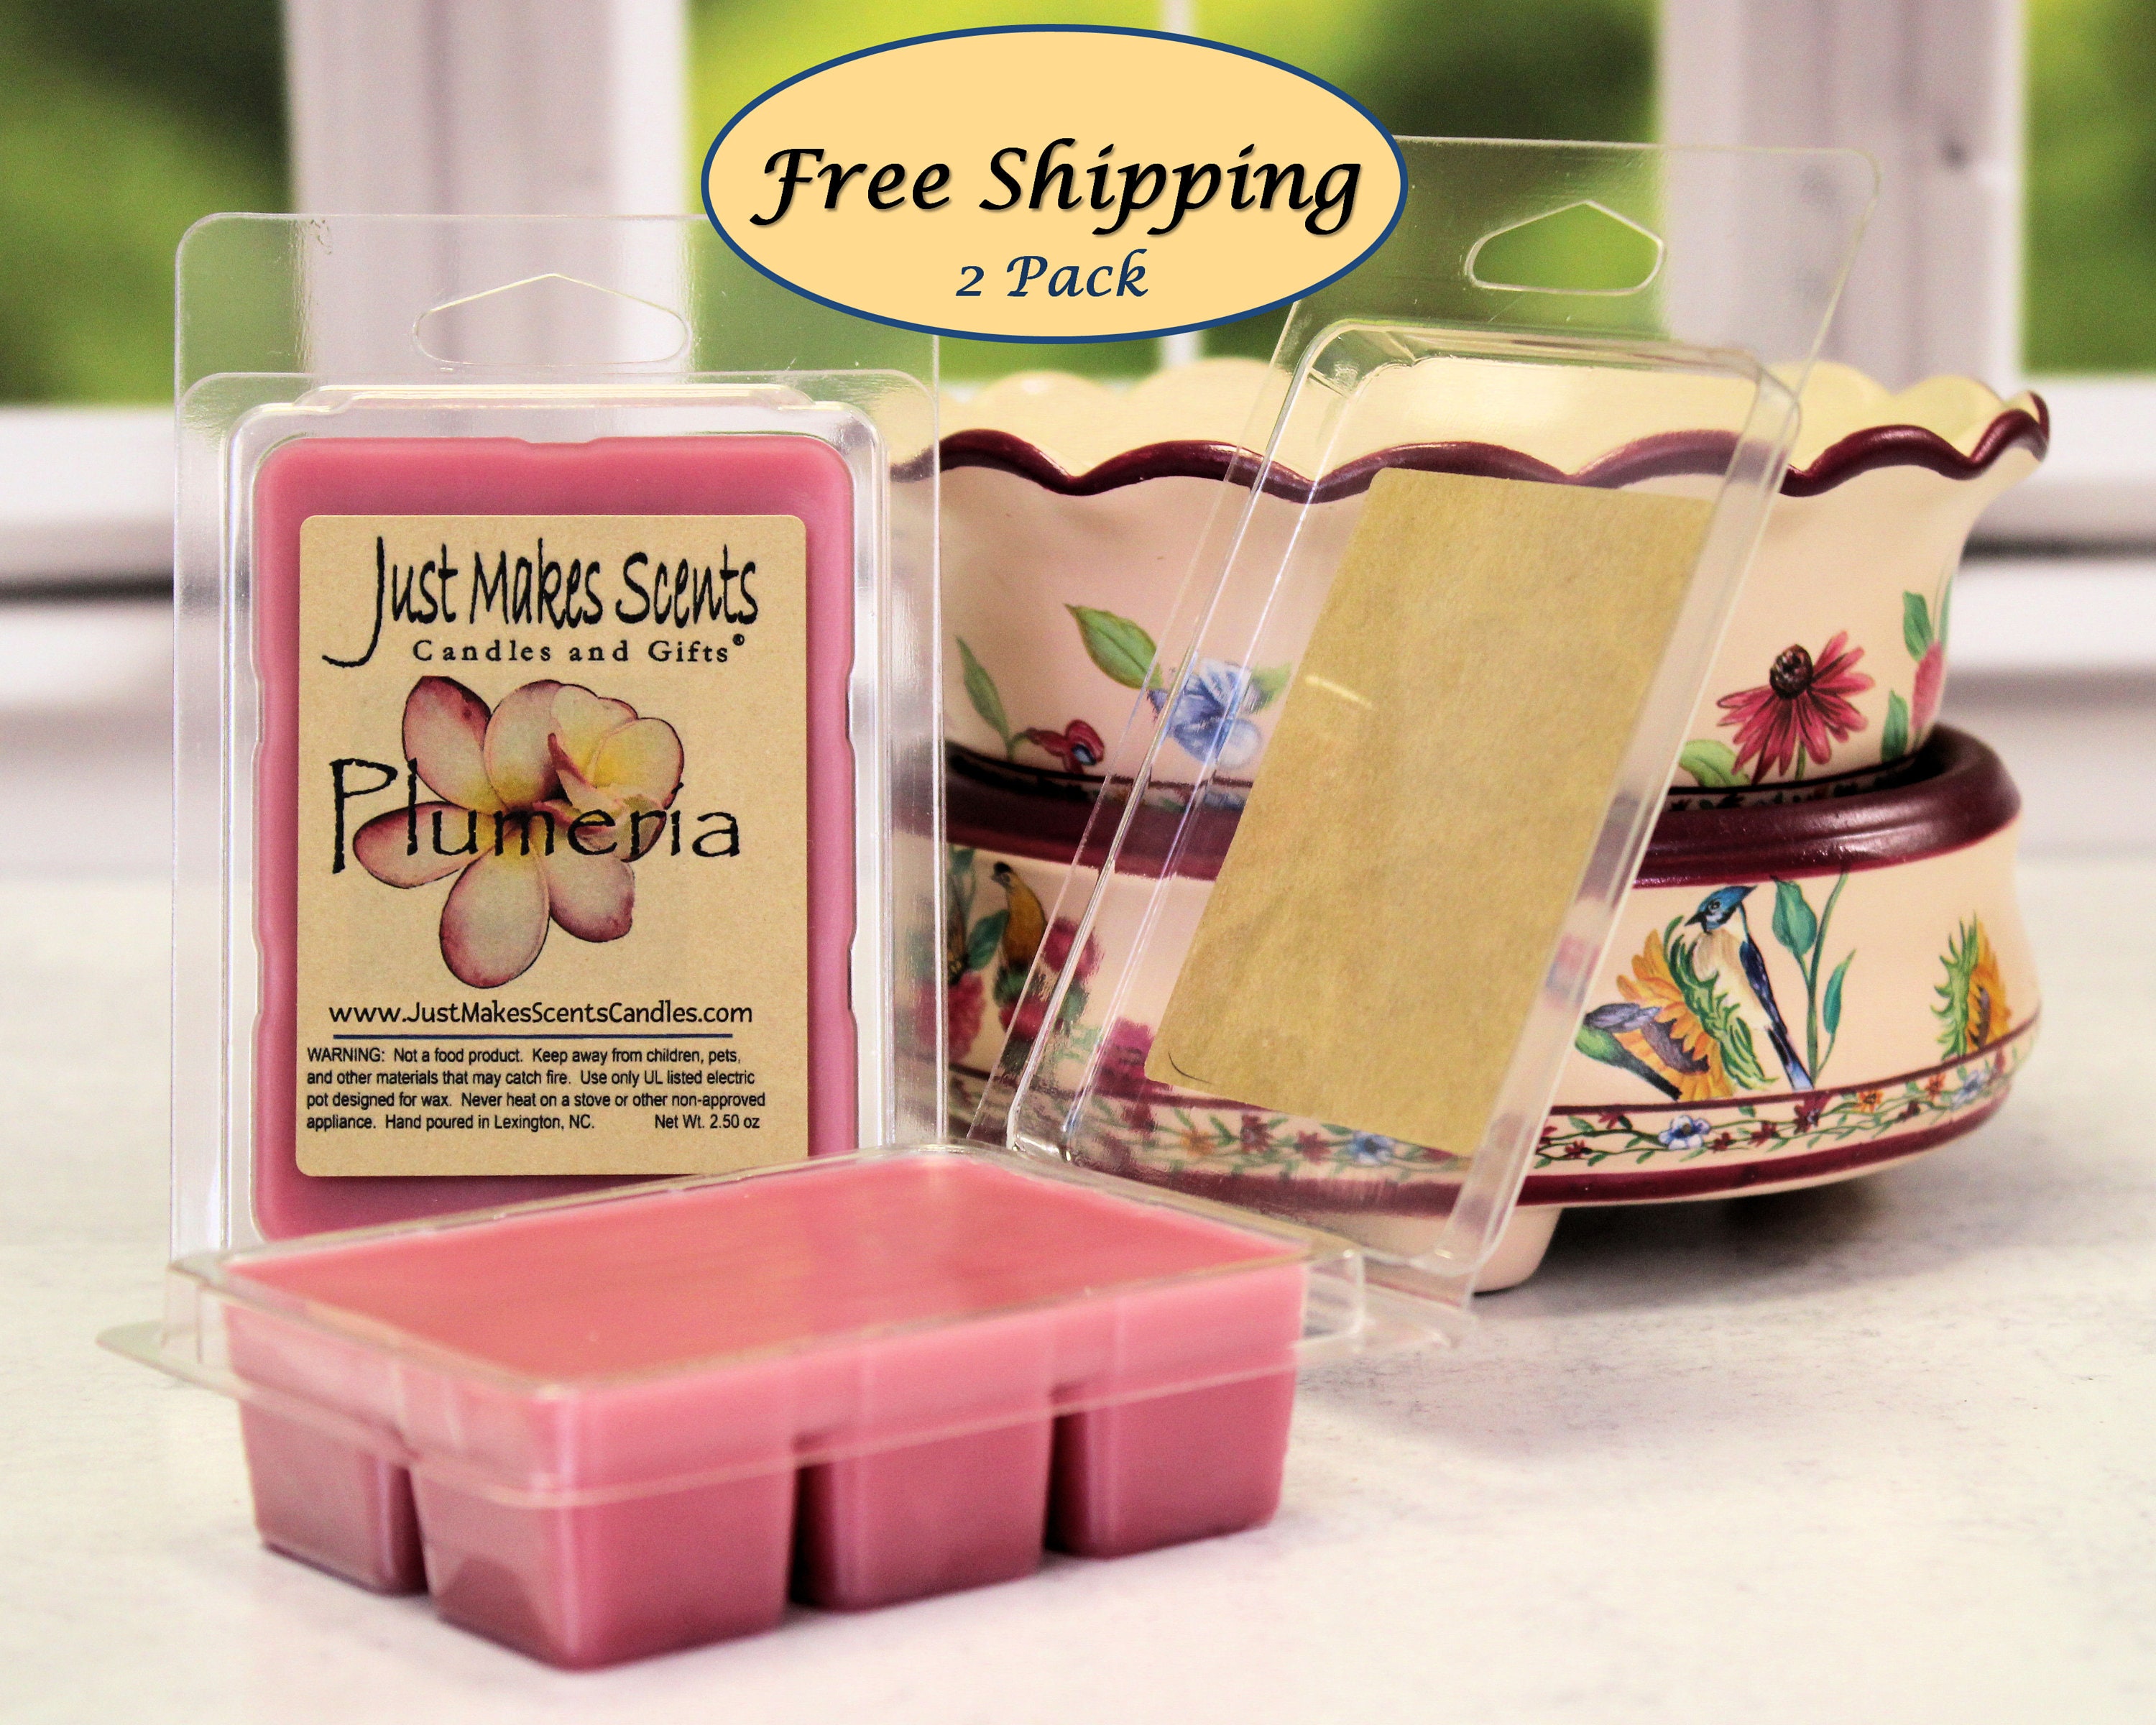 P&J BIG Scent Sets Perfect for Bath Bombs, Soaps, Slime, Candles